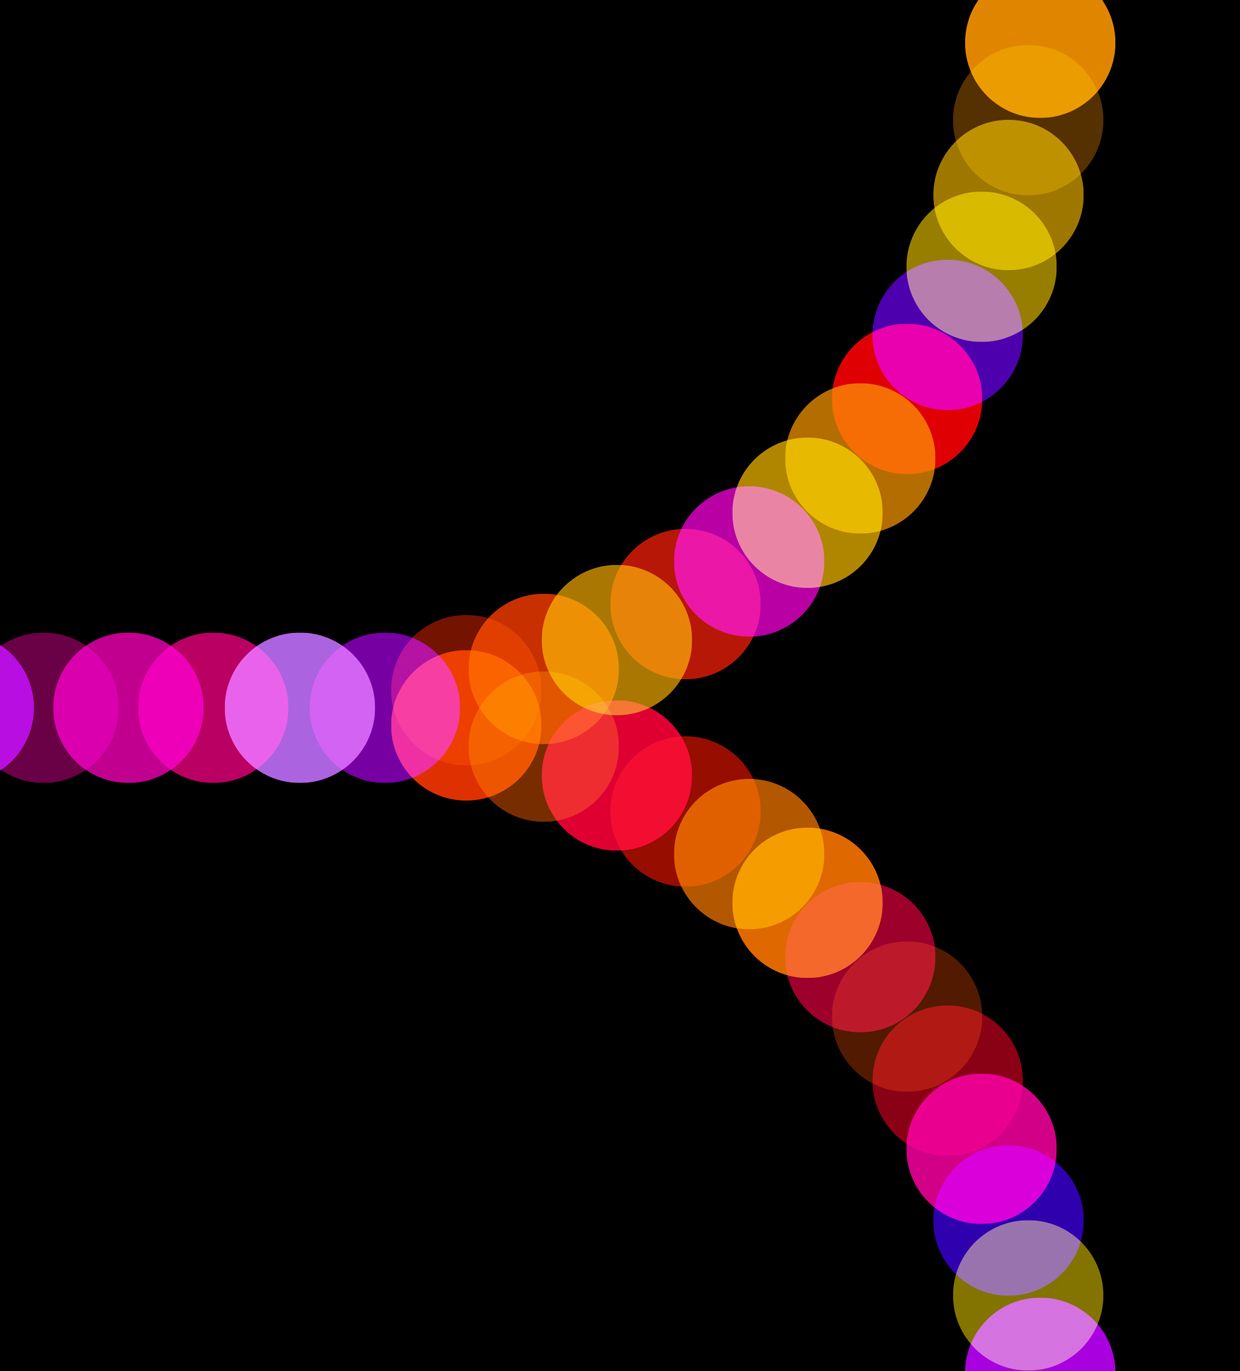 Image of colorful circles splitting in two directions.